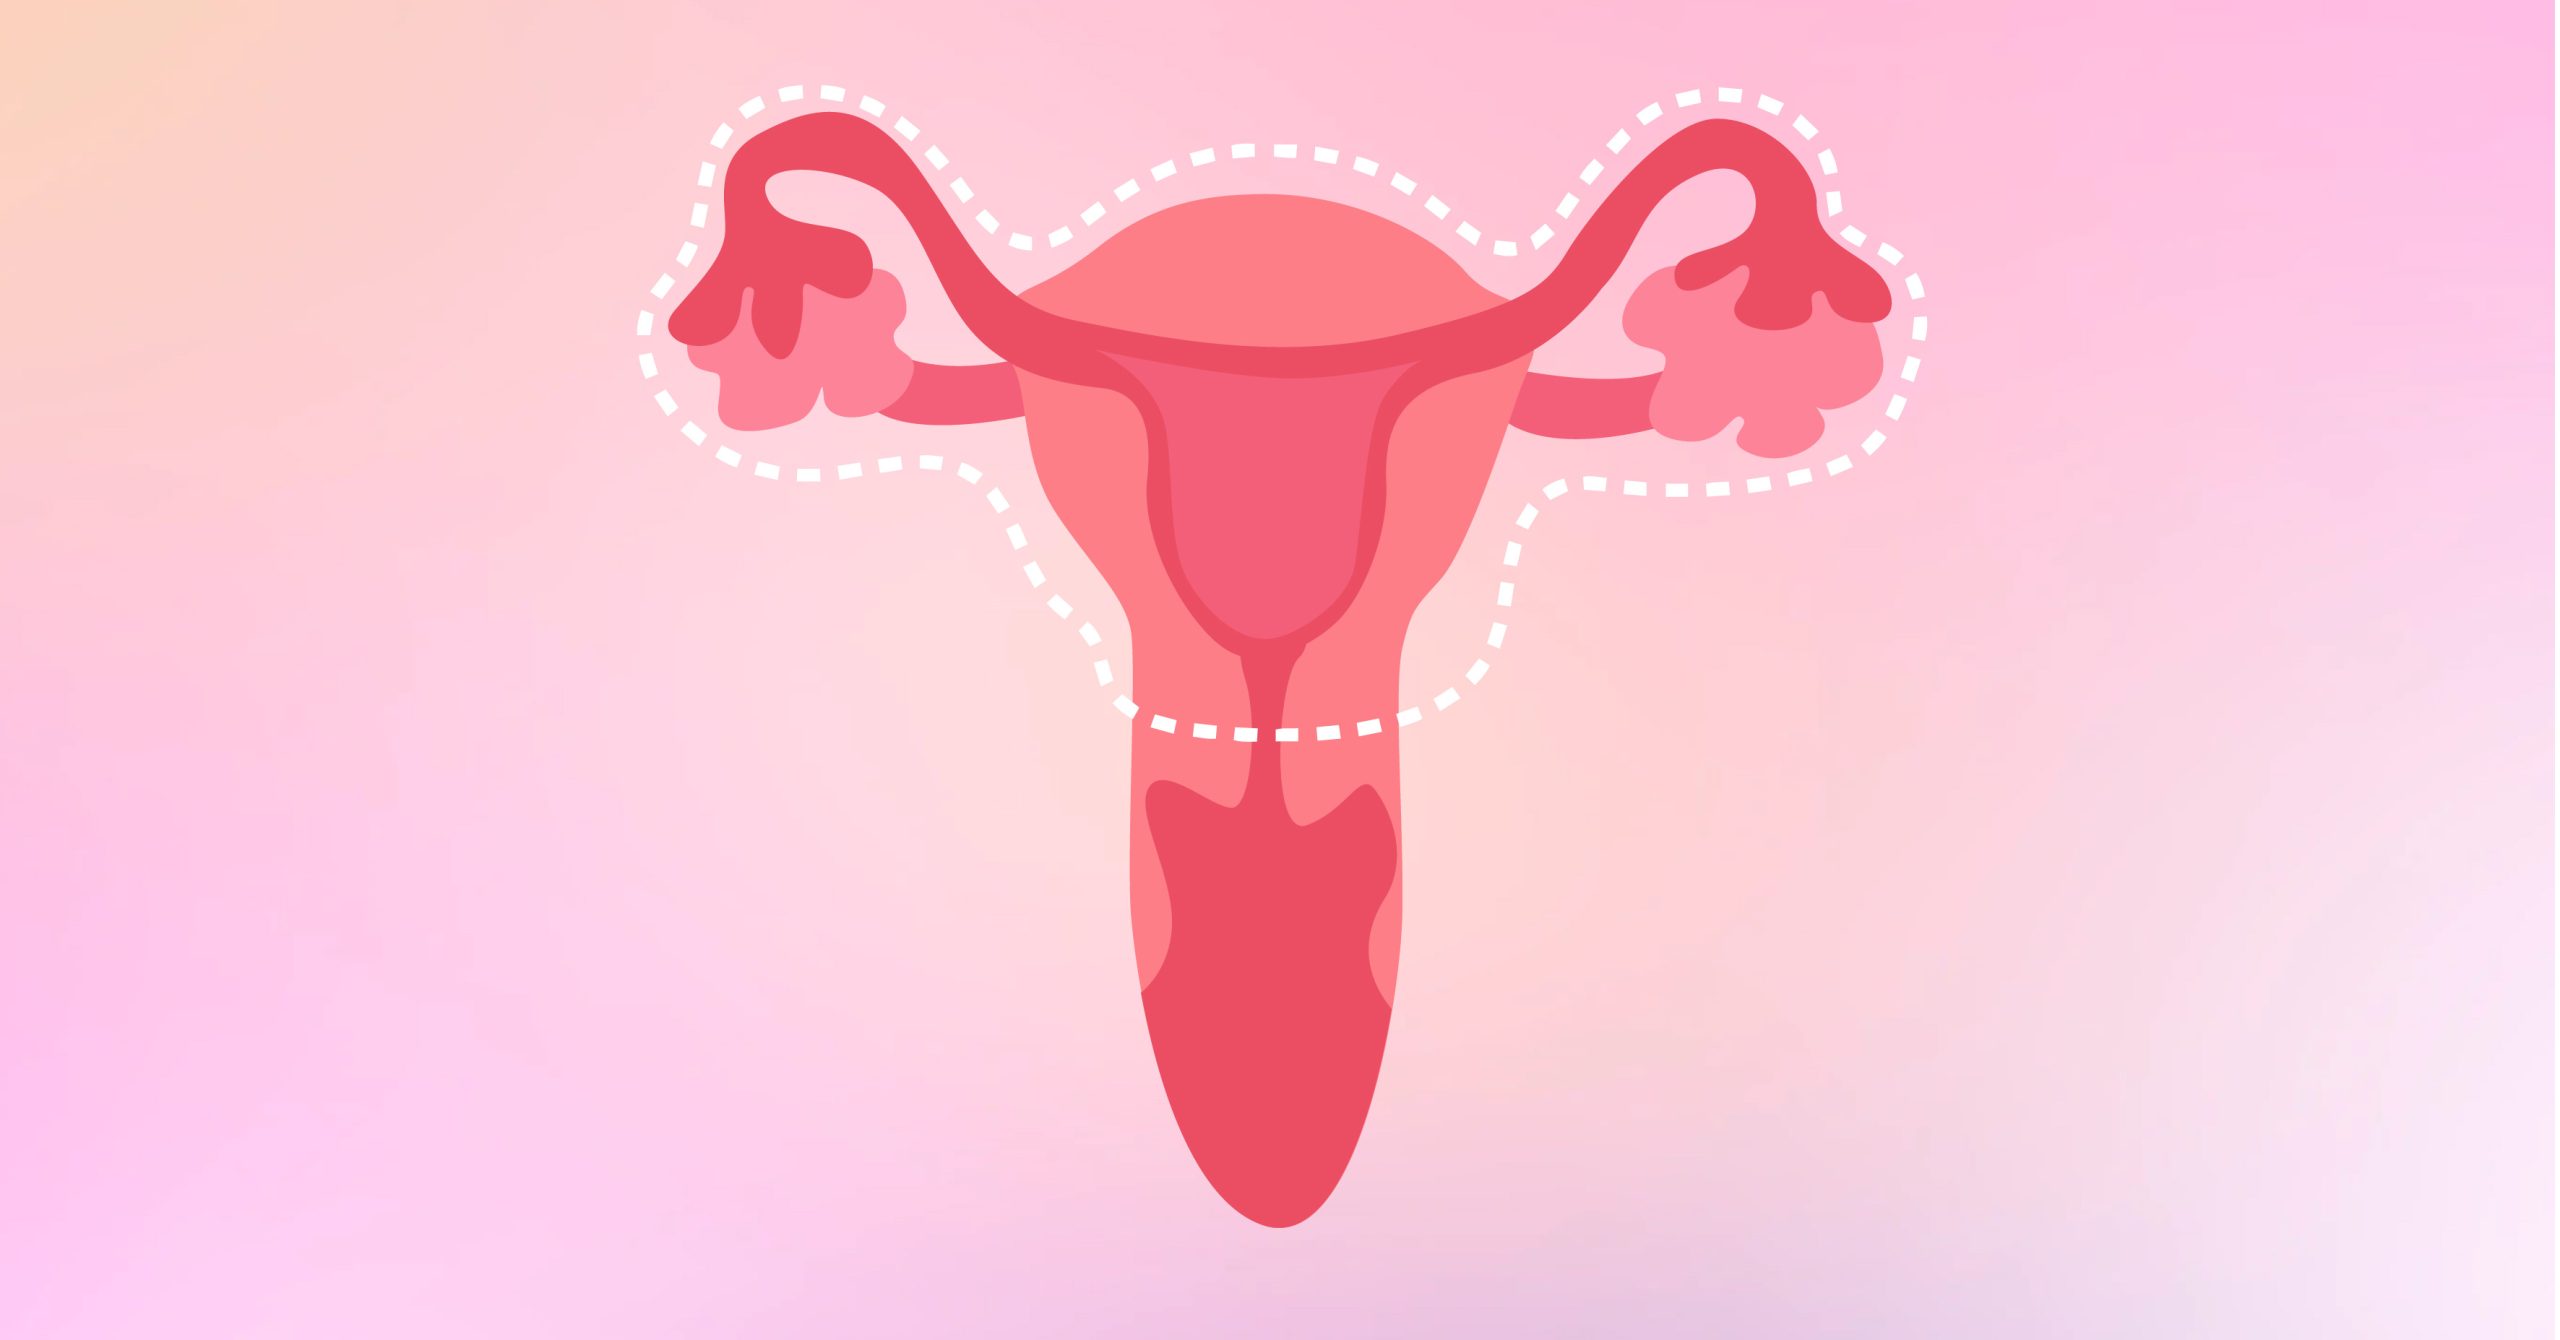 Hysterectomy 101: The Last of (Uter)us